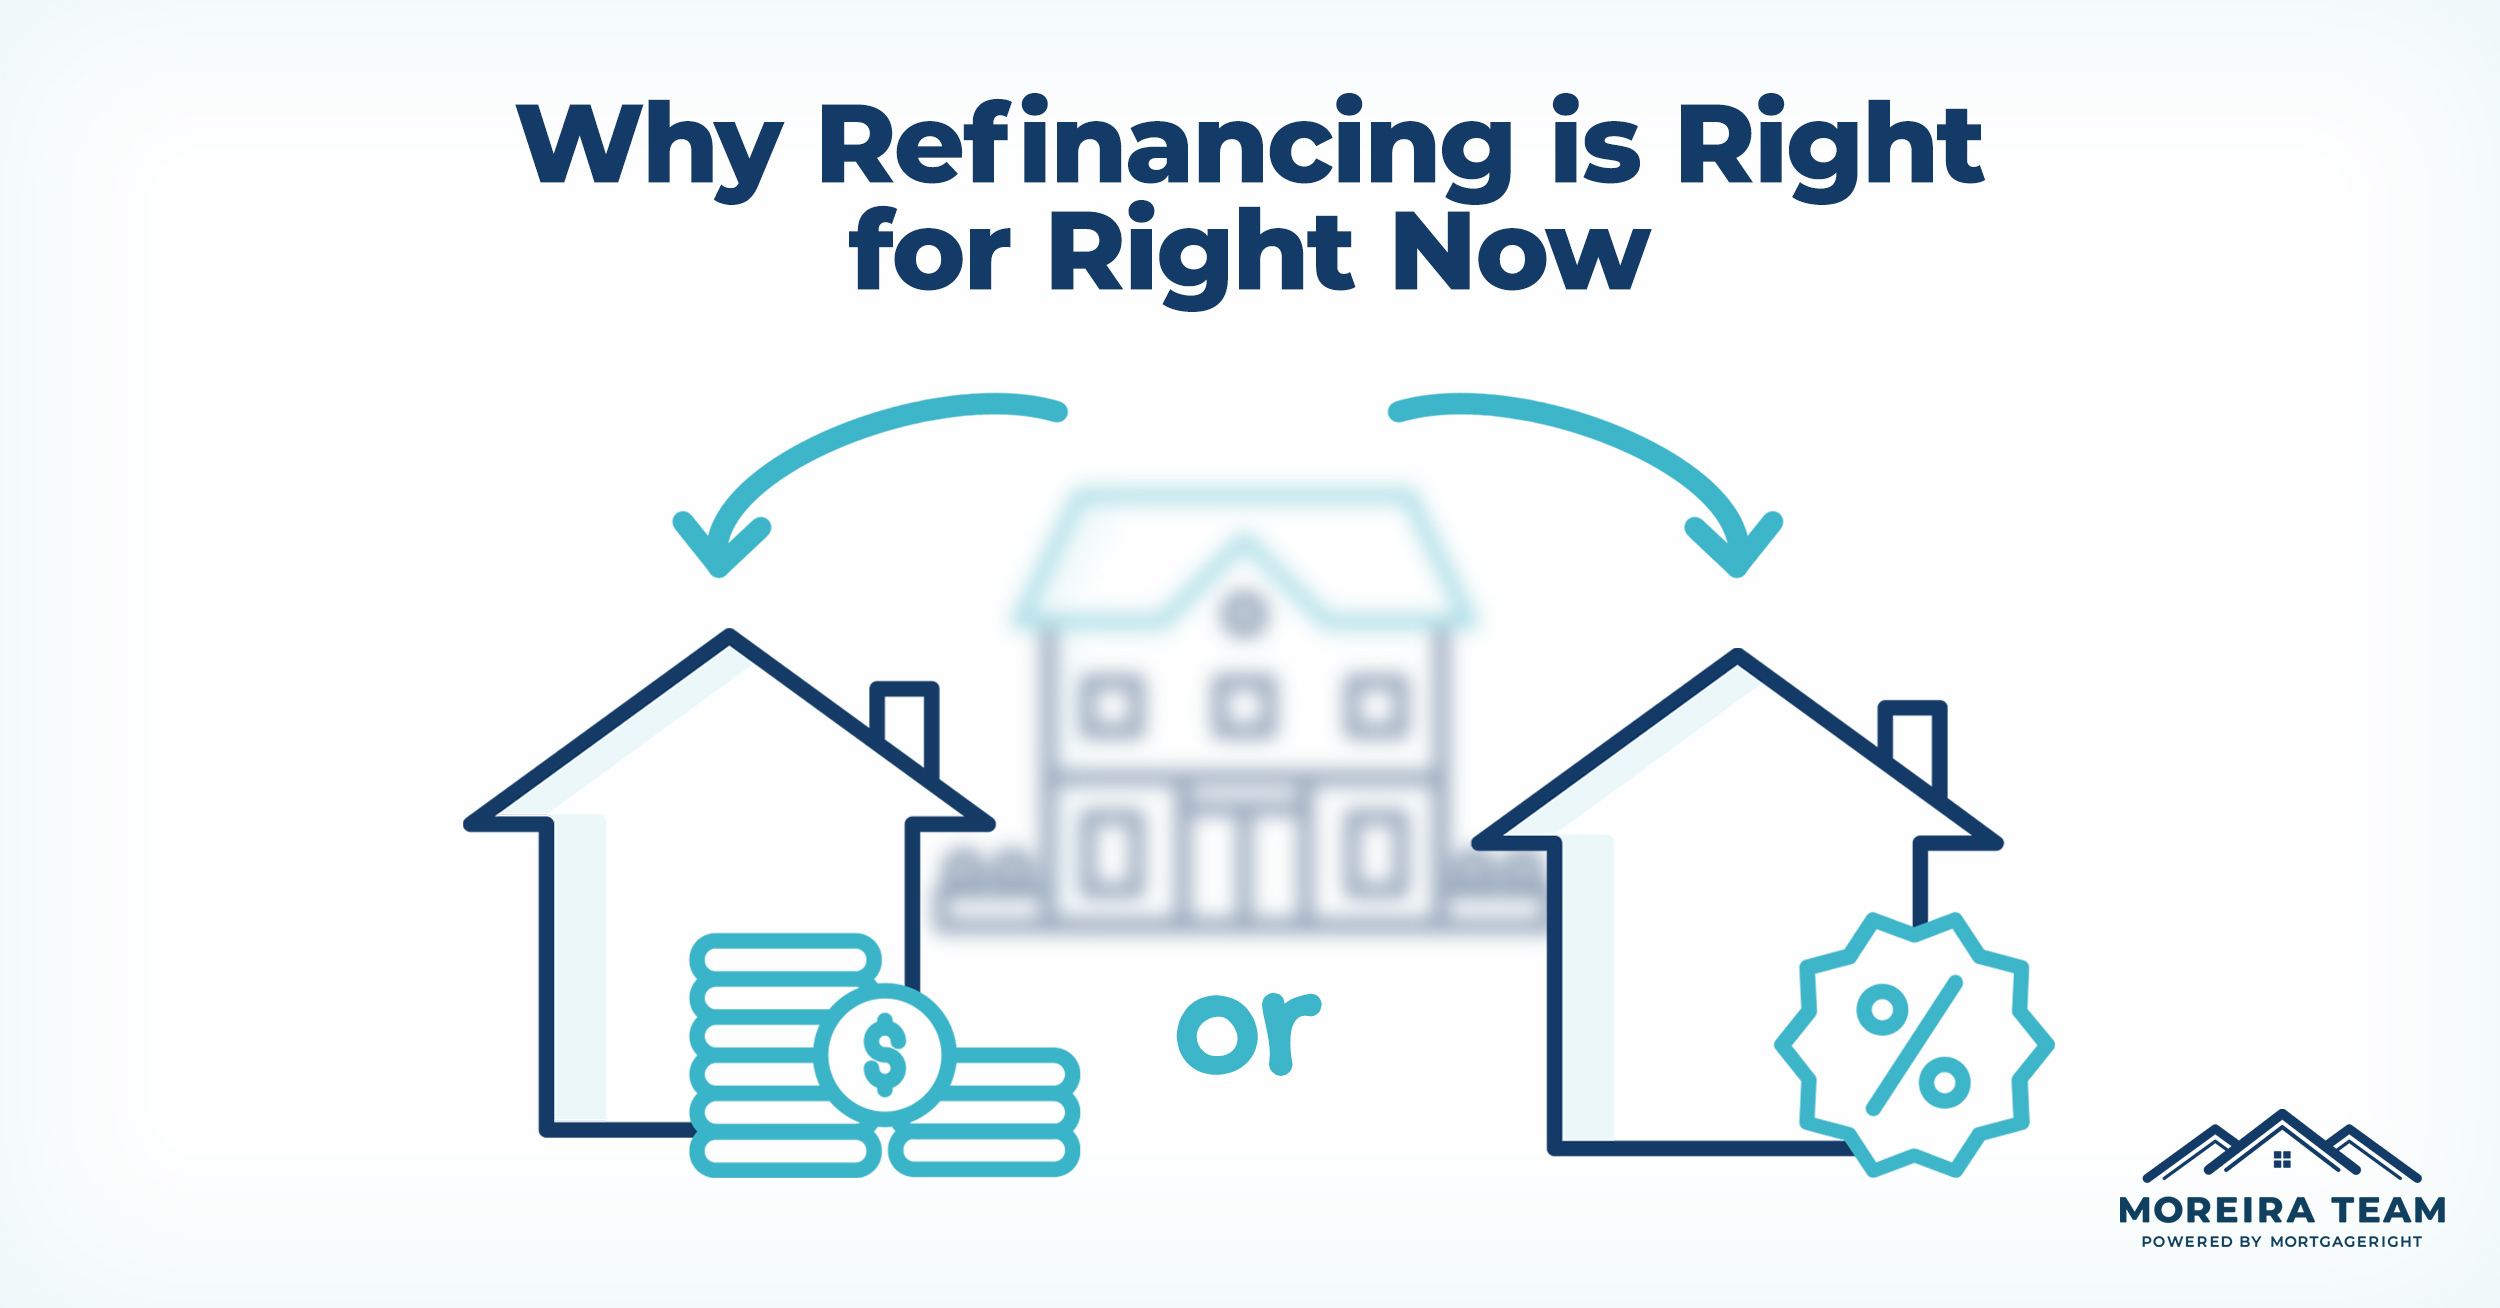 Why Refinancing is Right, Right Now